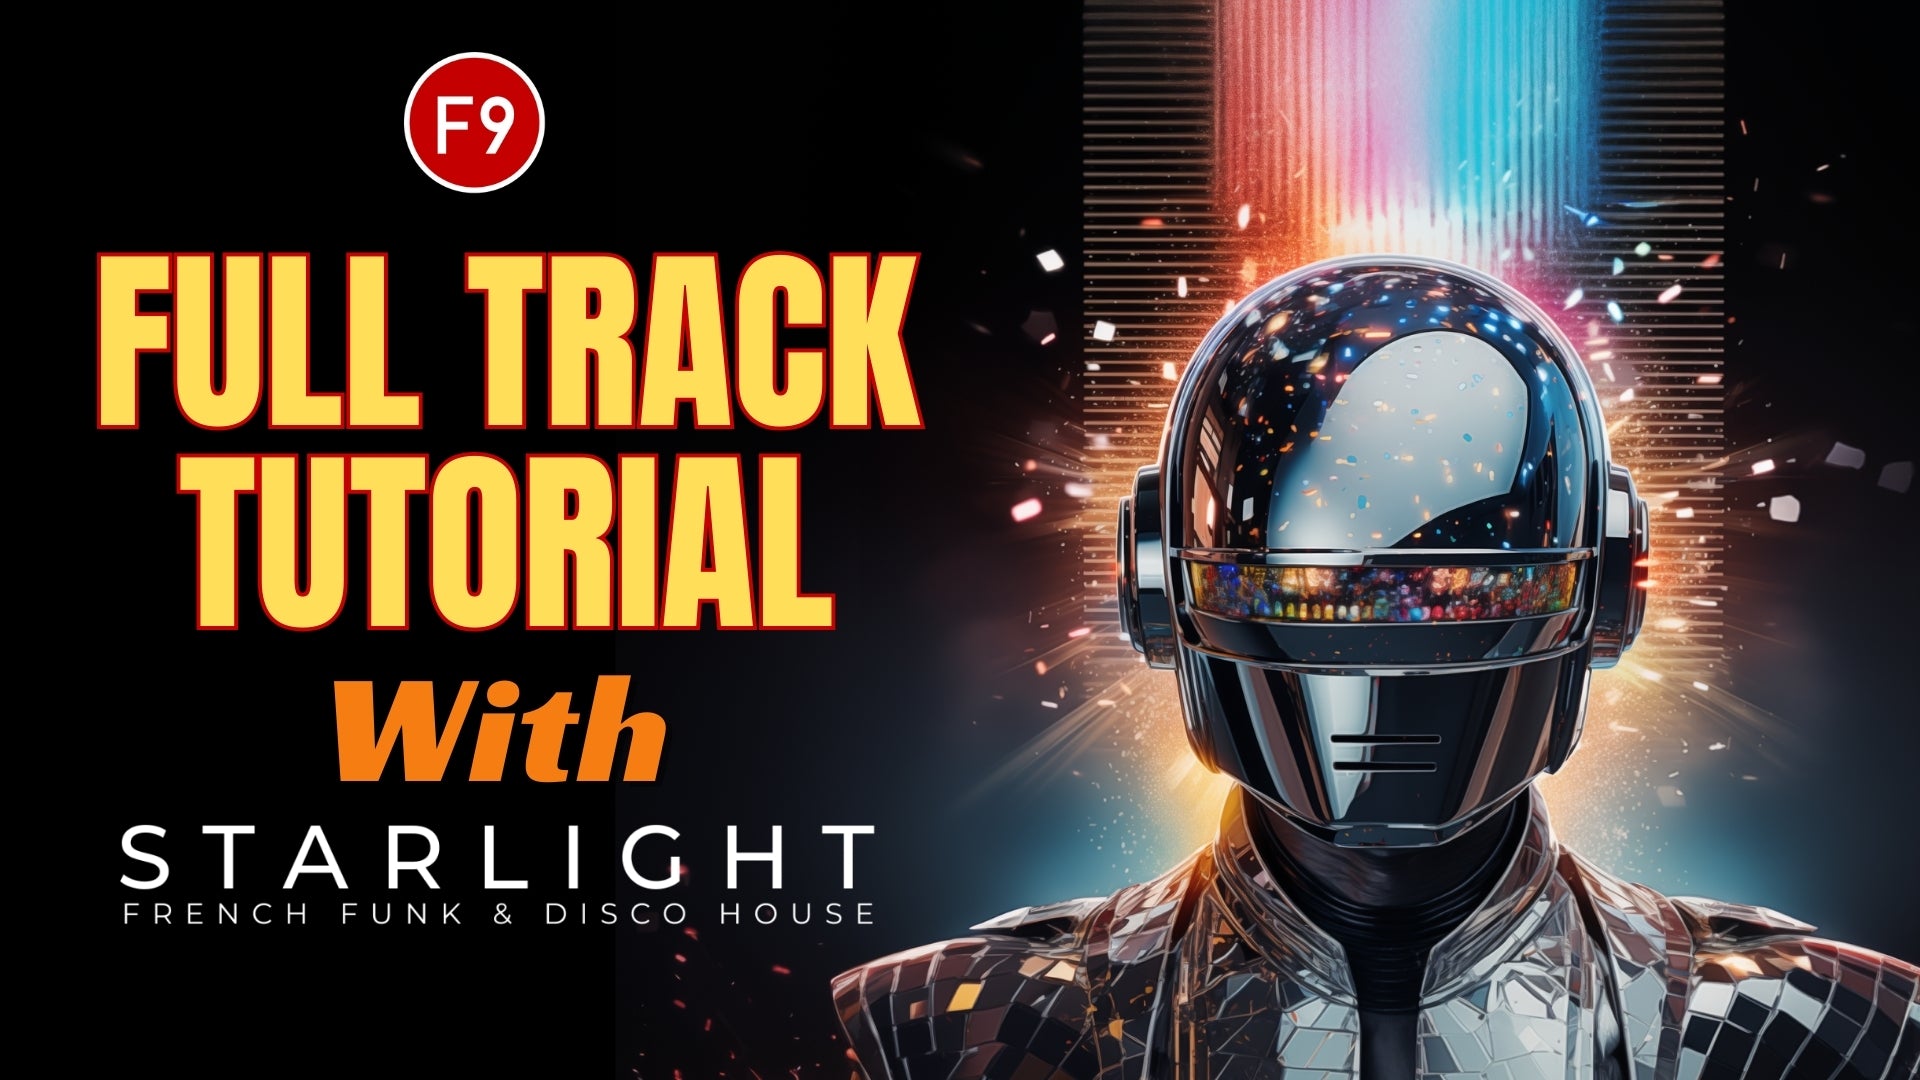 A Full Track Tutorial with F9 STARLIGHT